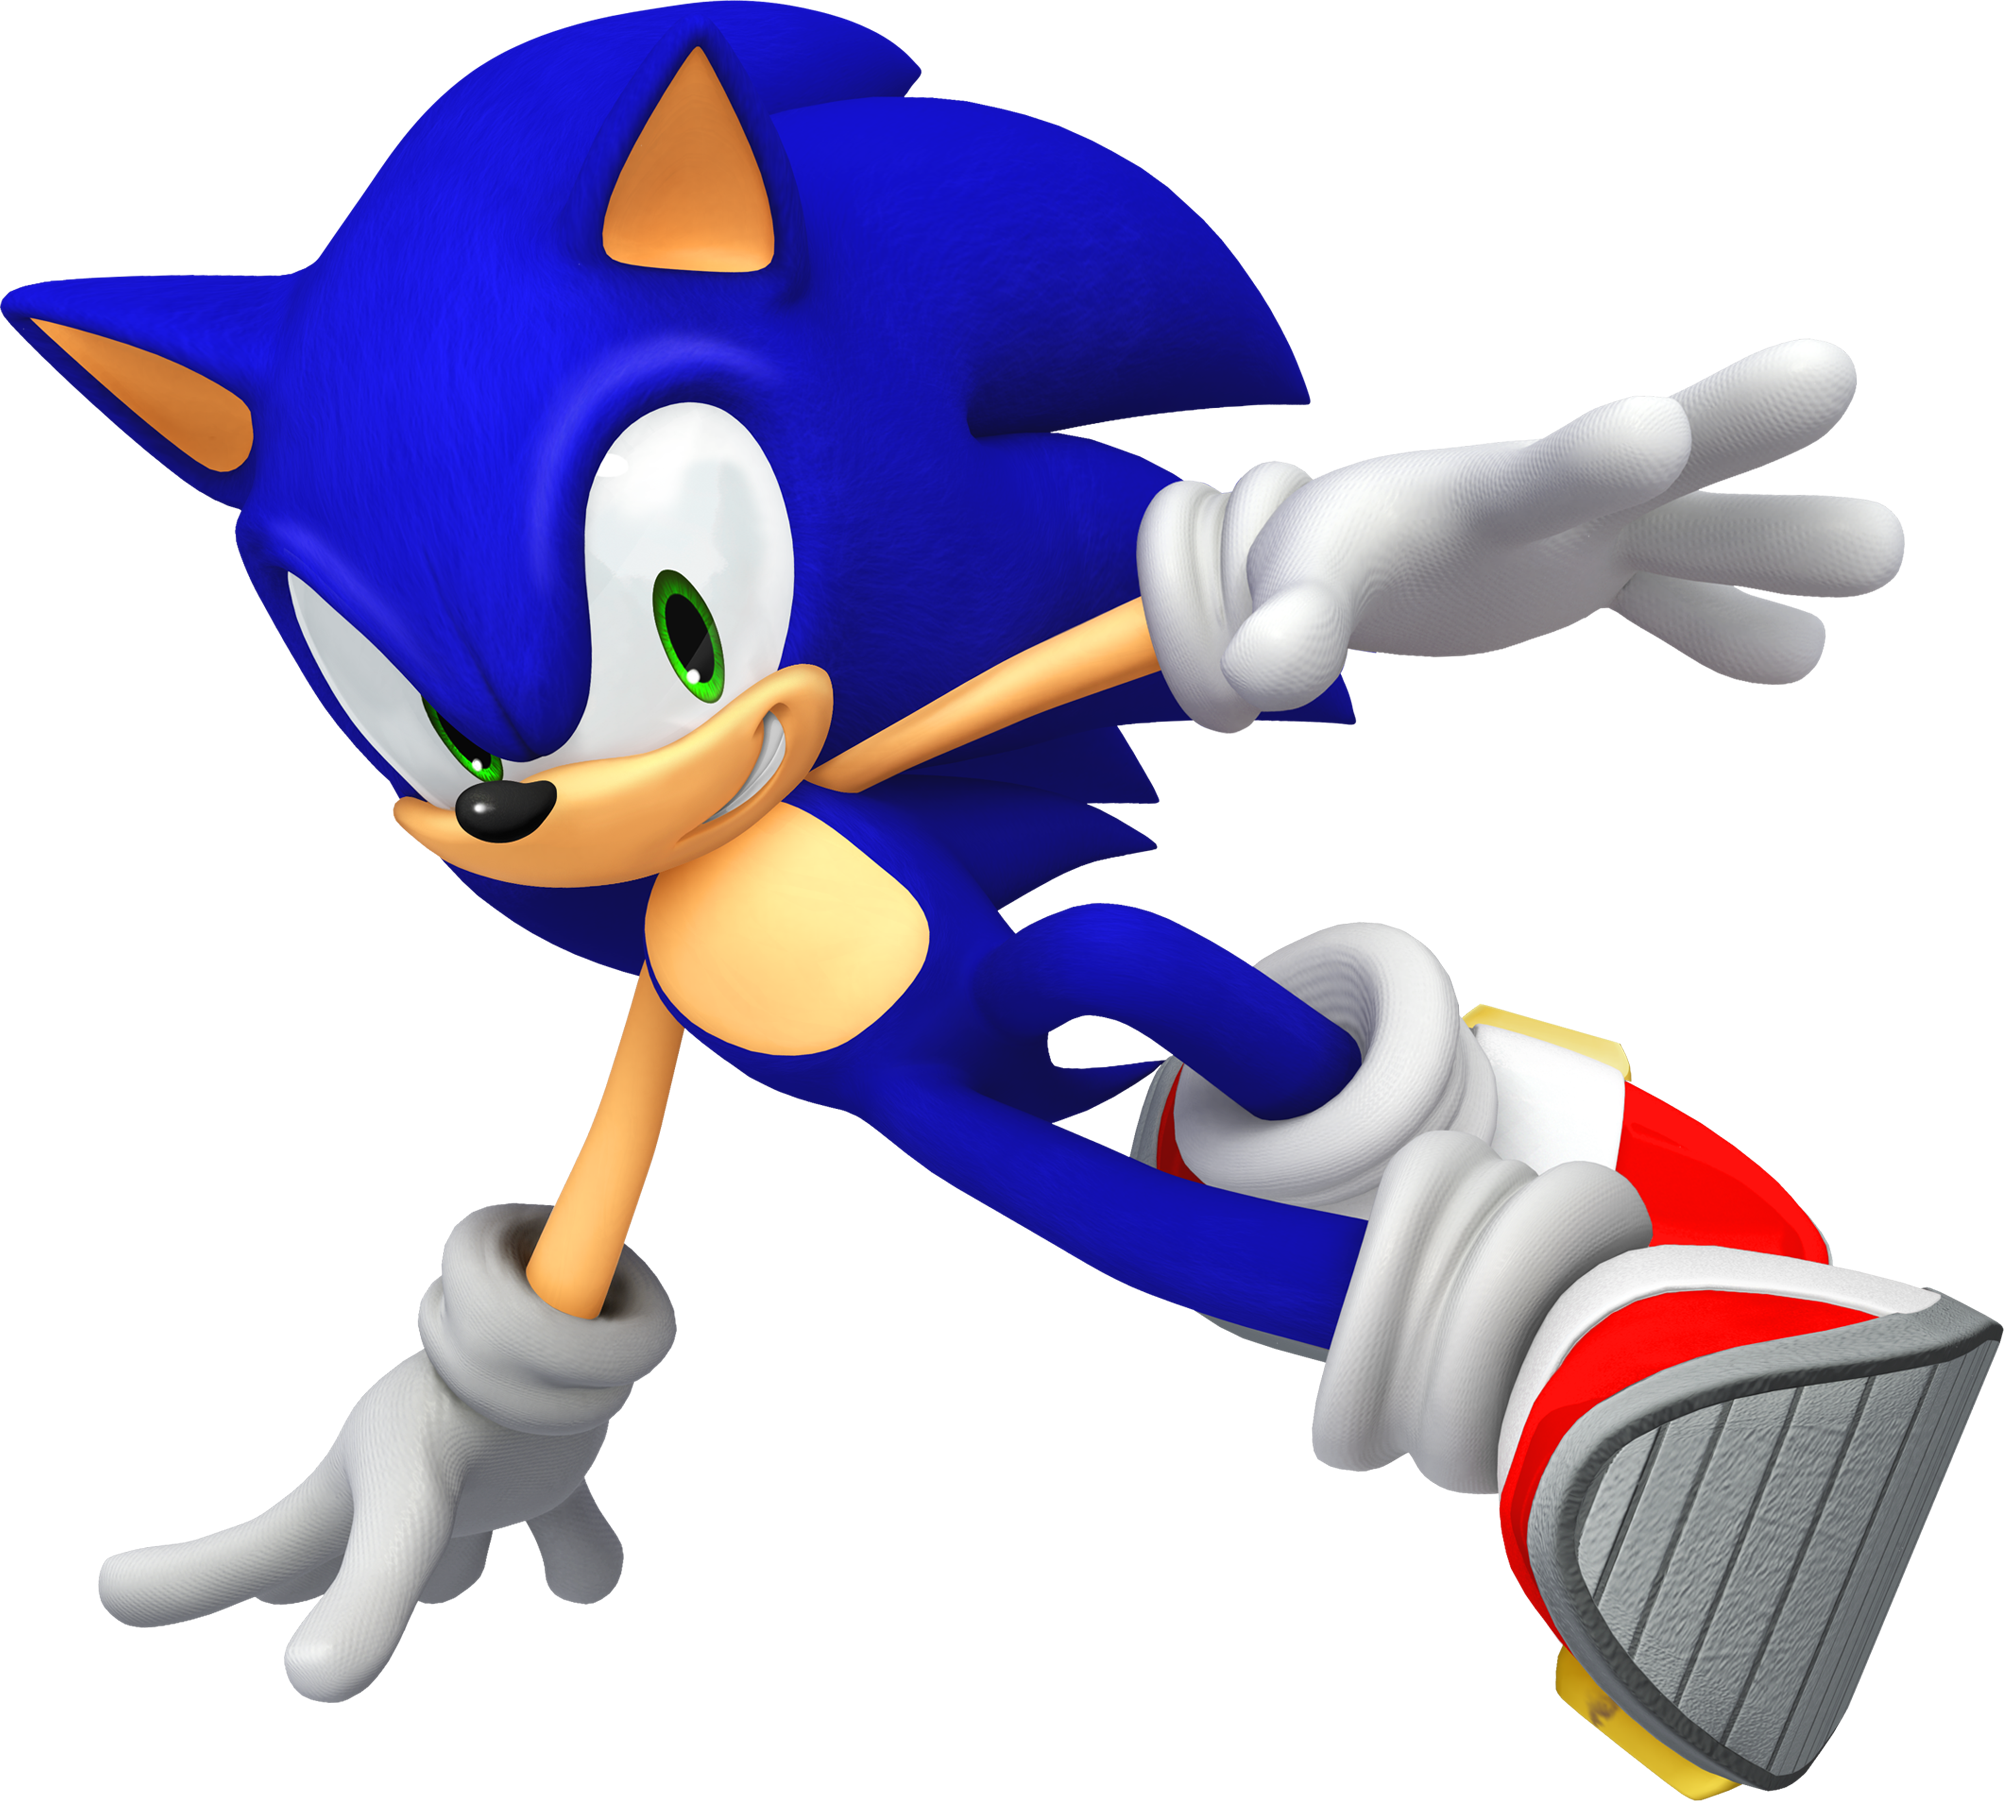 Images tagged "sonic-the-hedgehog-5" .